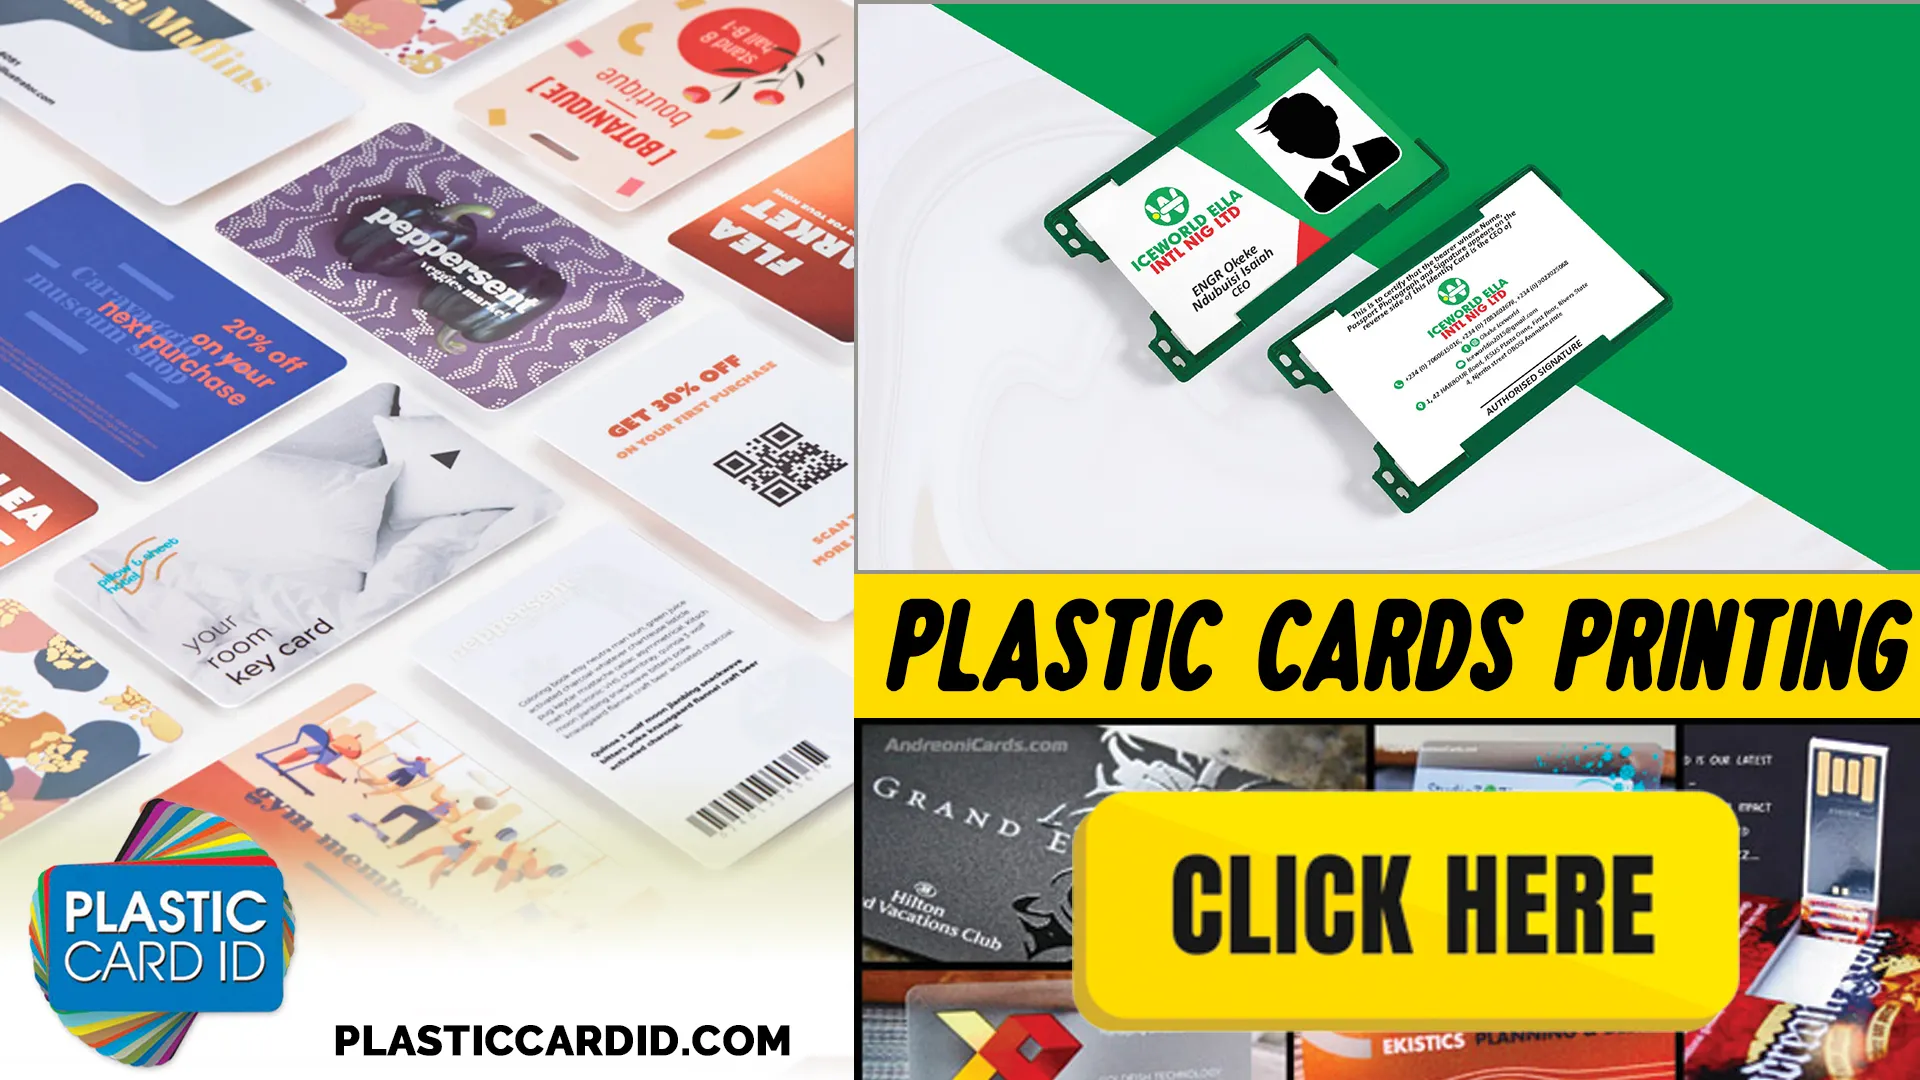 Popular Uses for Printed Plastic Cards